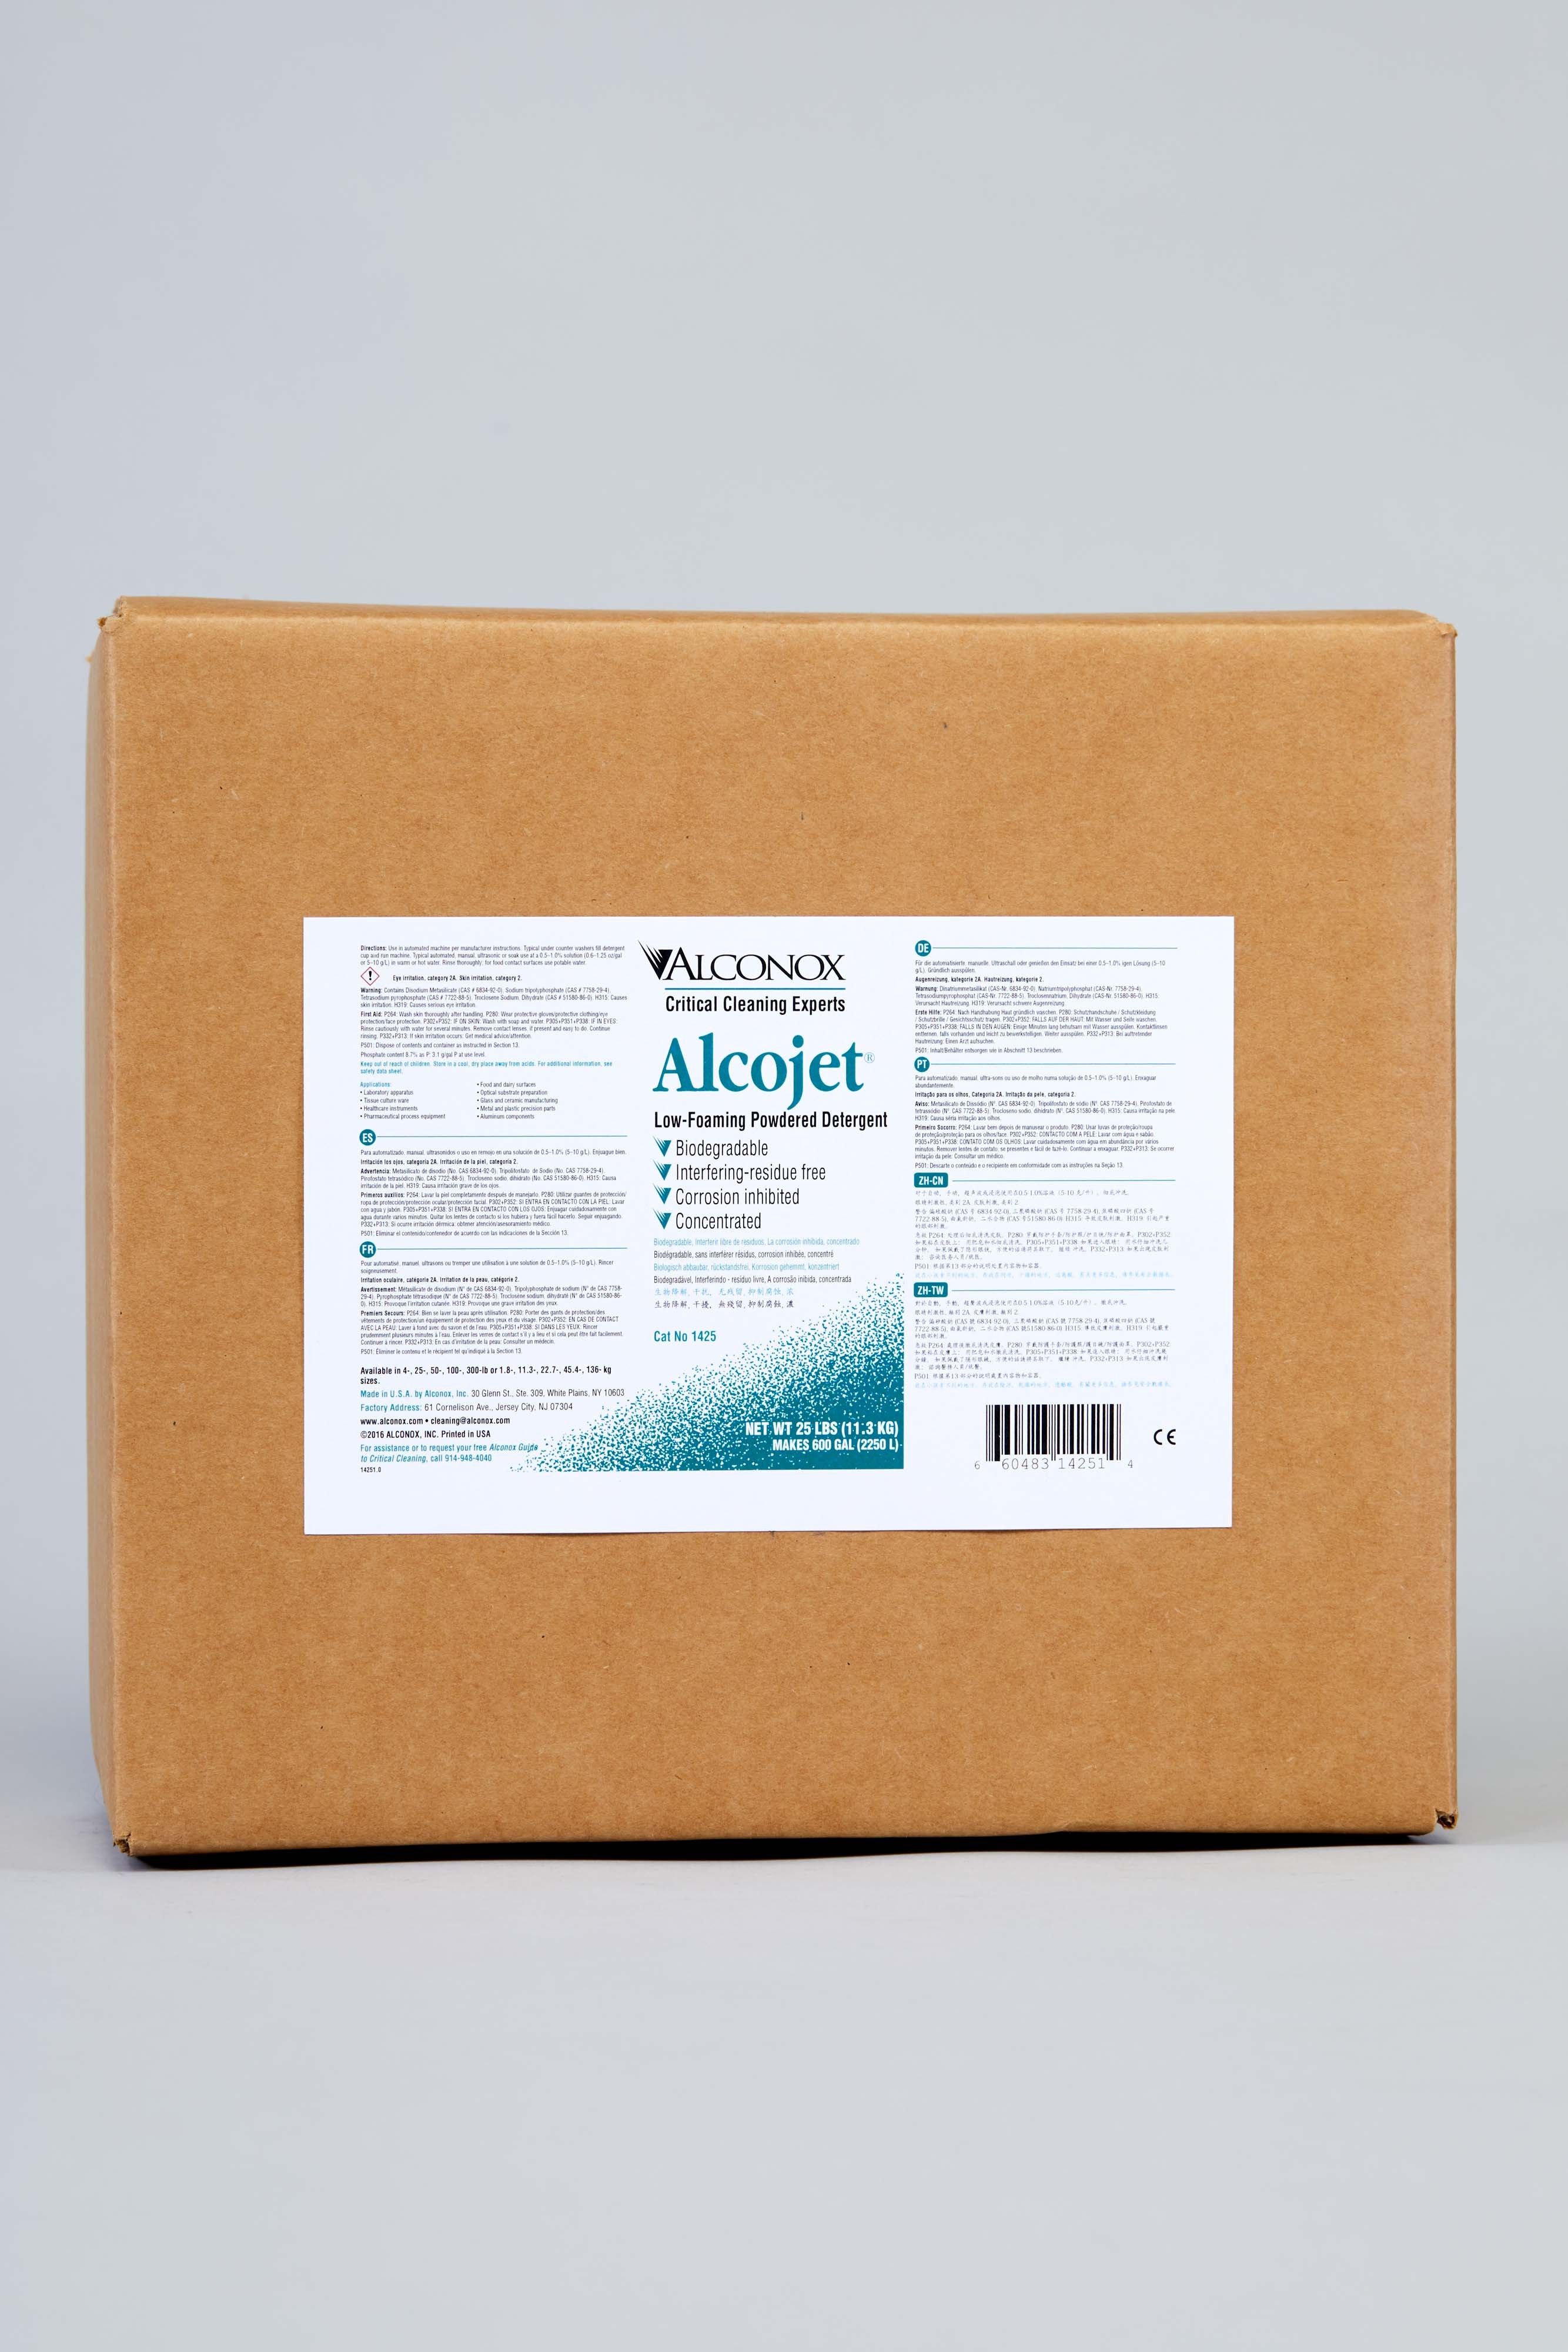 Alcojet Low Foaming Powdered Detergent - 25 lb.